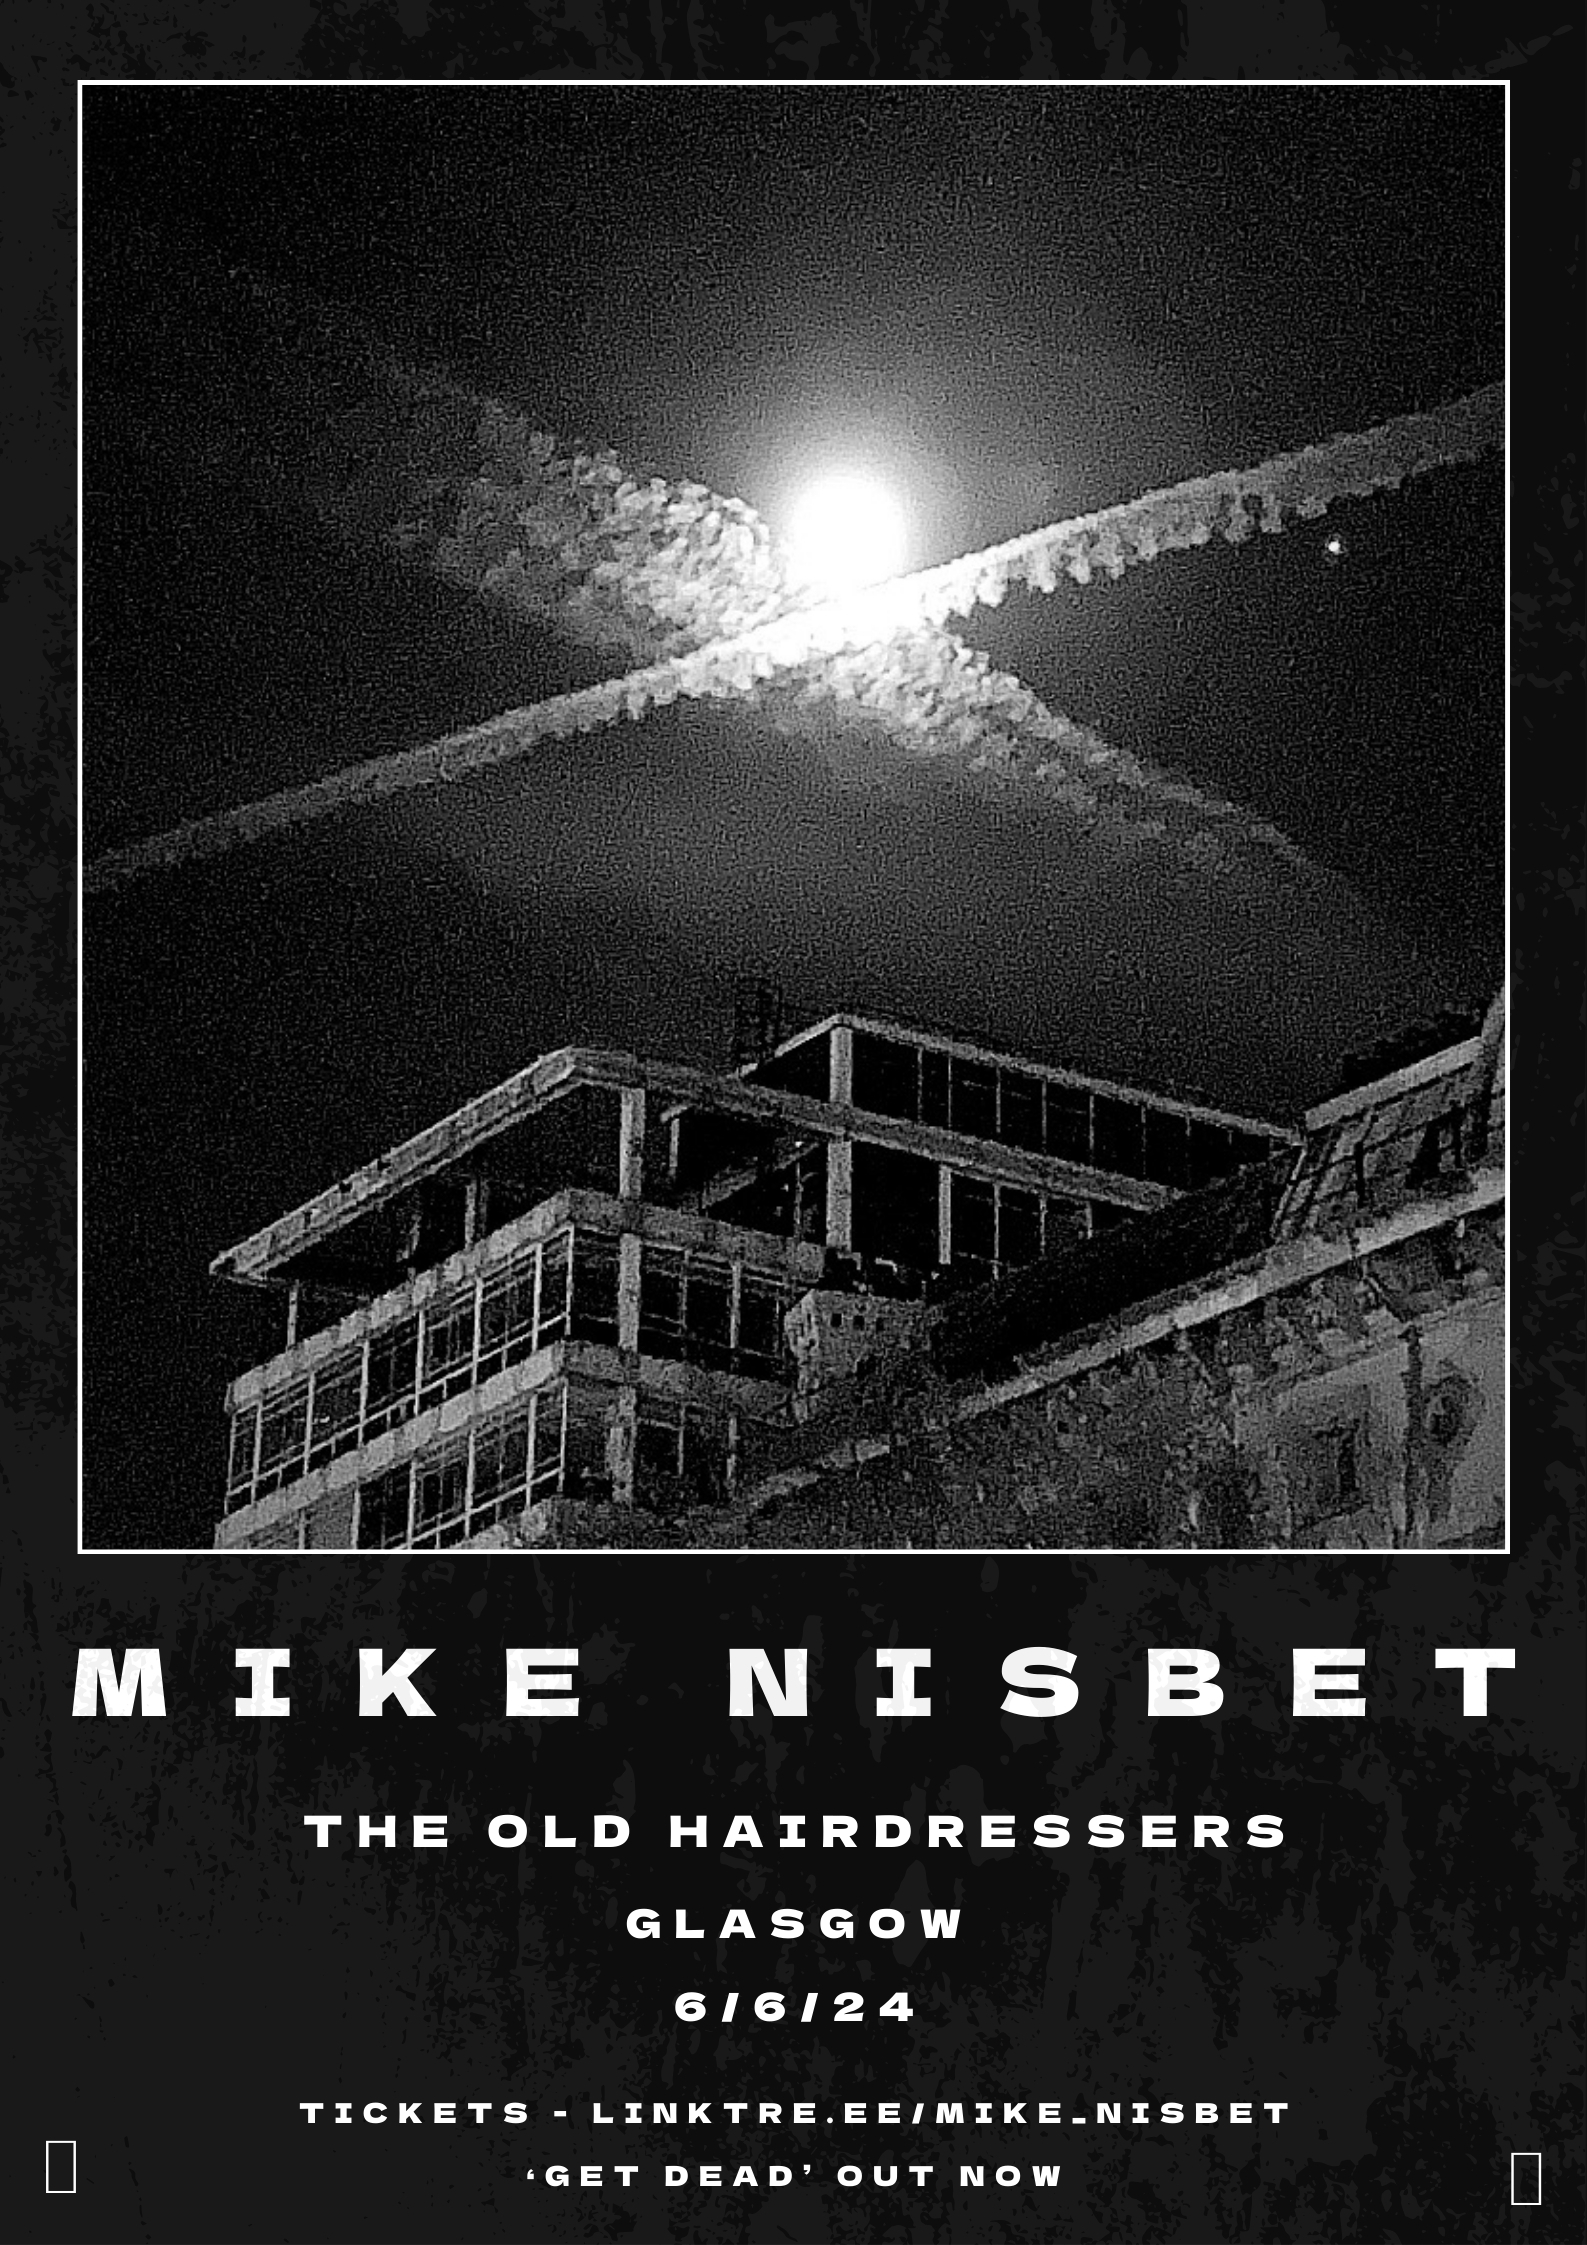 6_6_24 Mike Nisbet - Glasgow - The Old Hairdressers